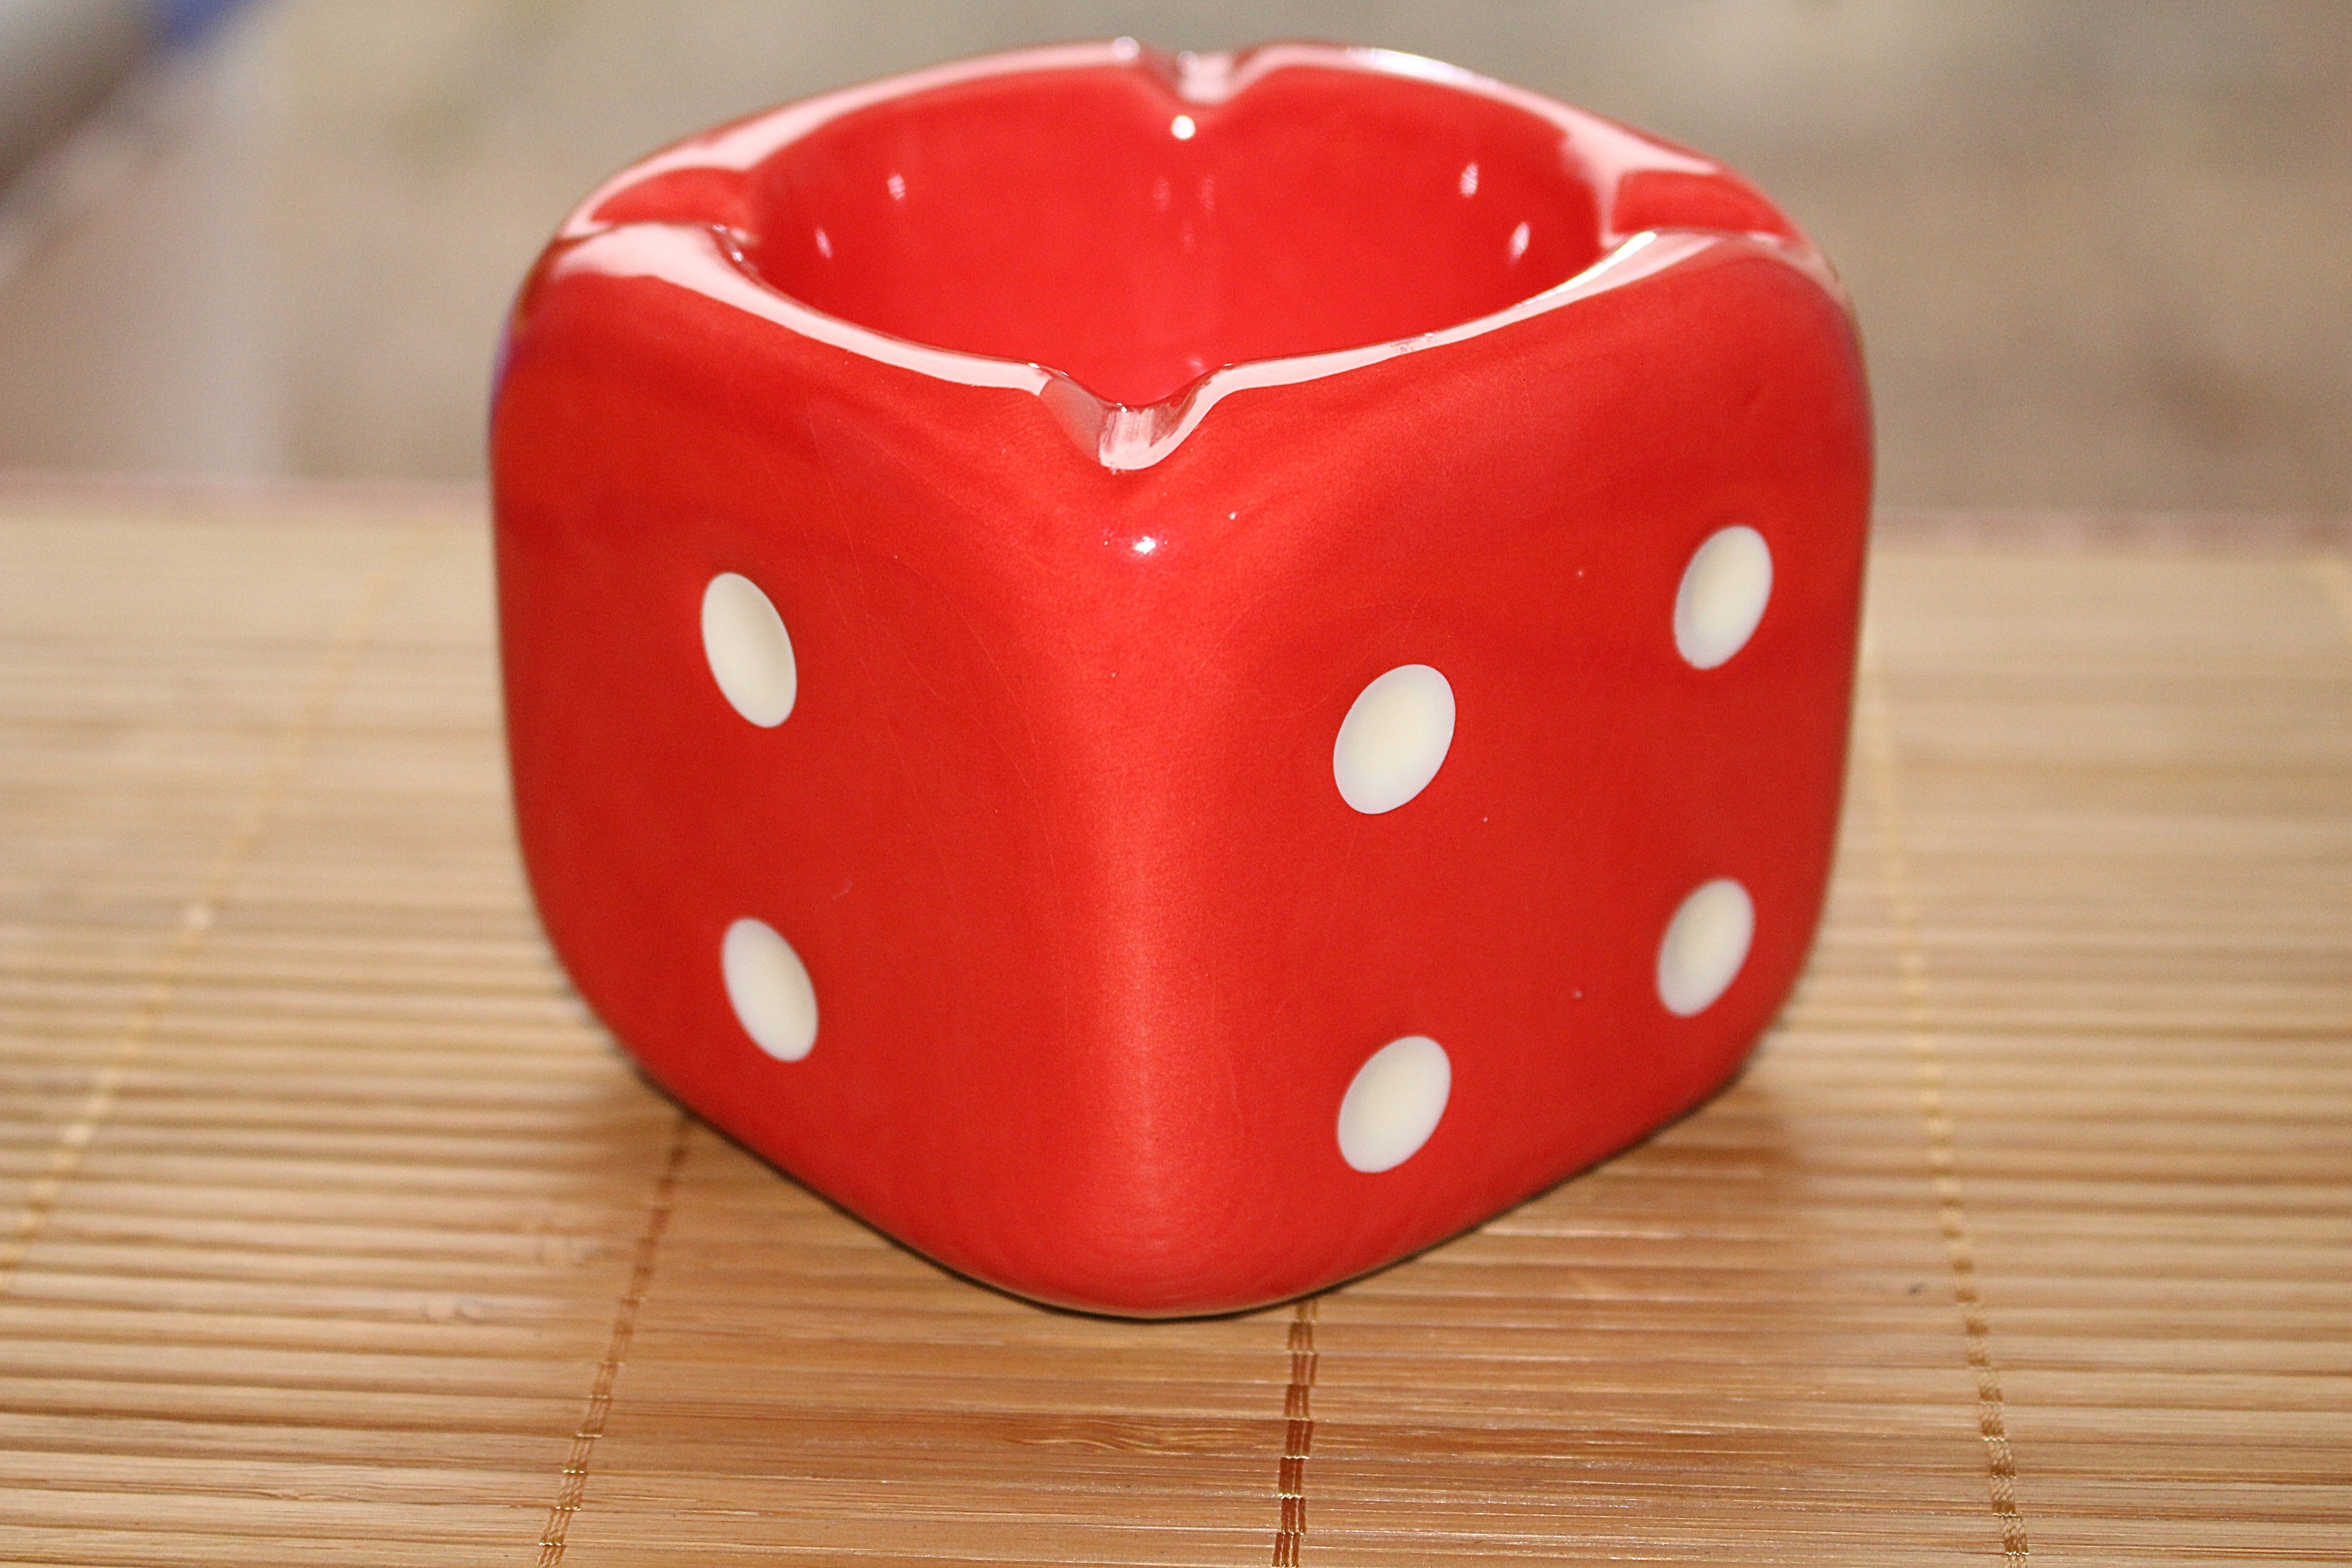 red and white dice themed  ashtray